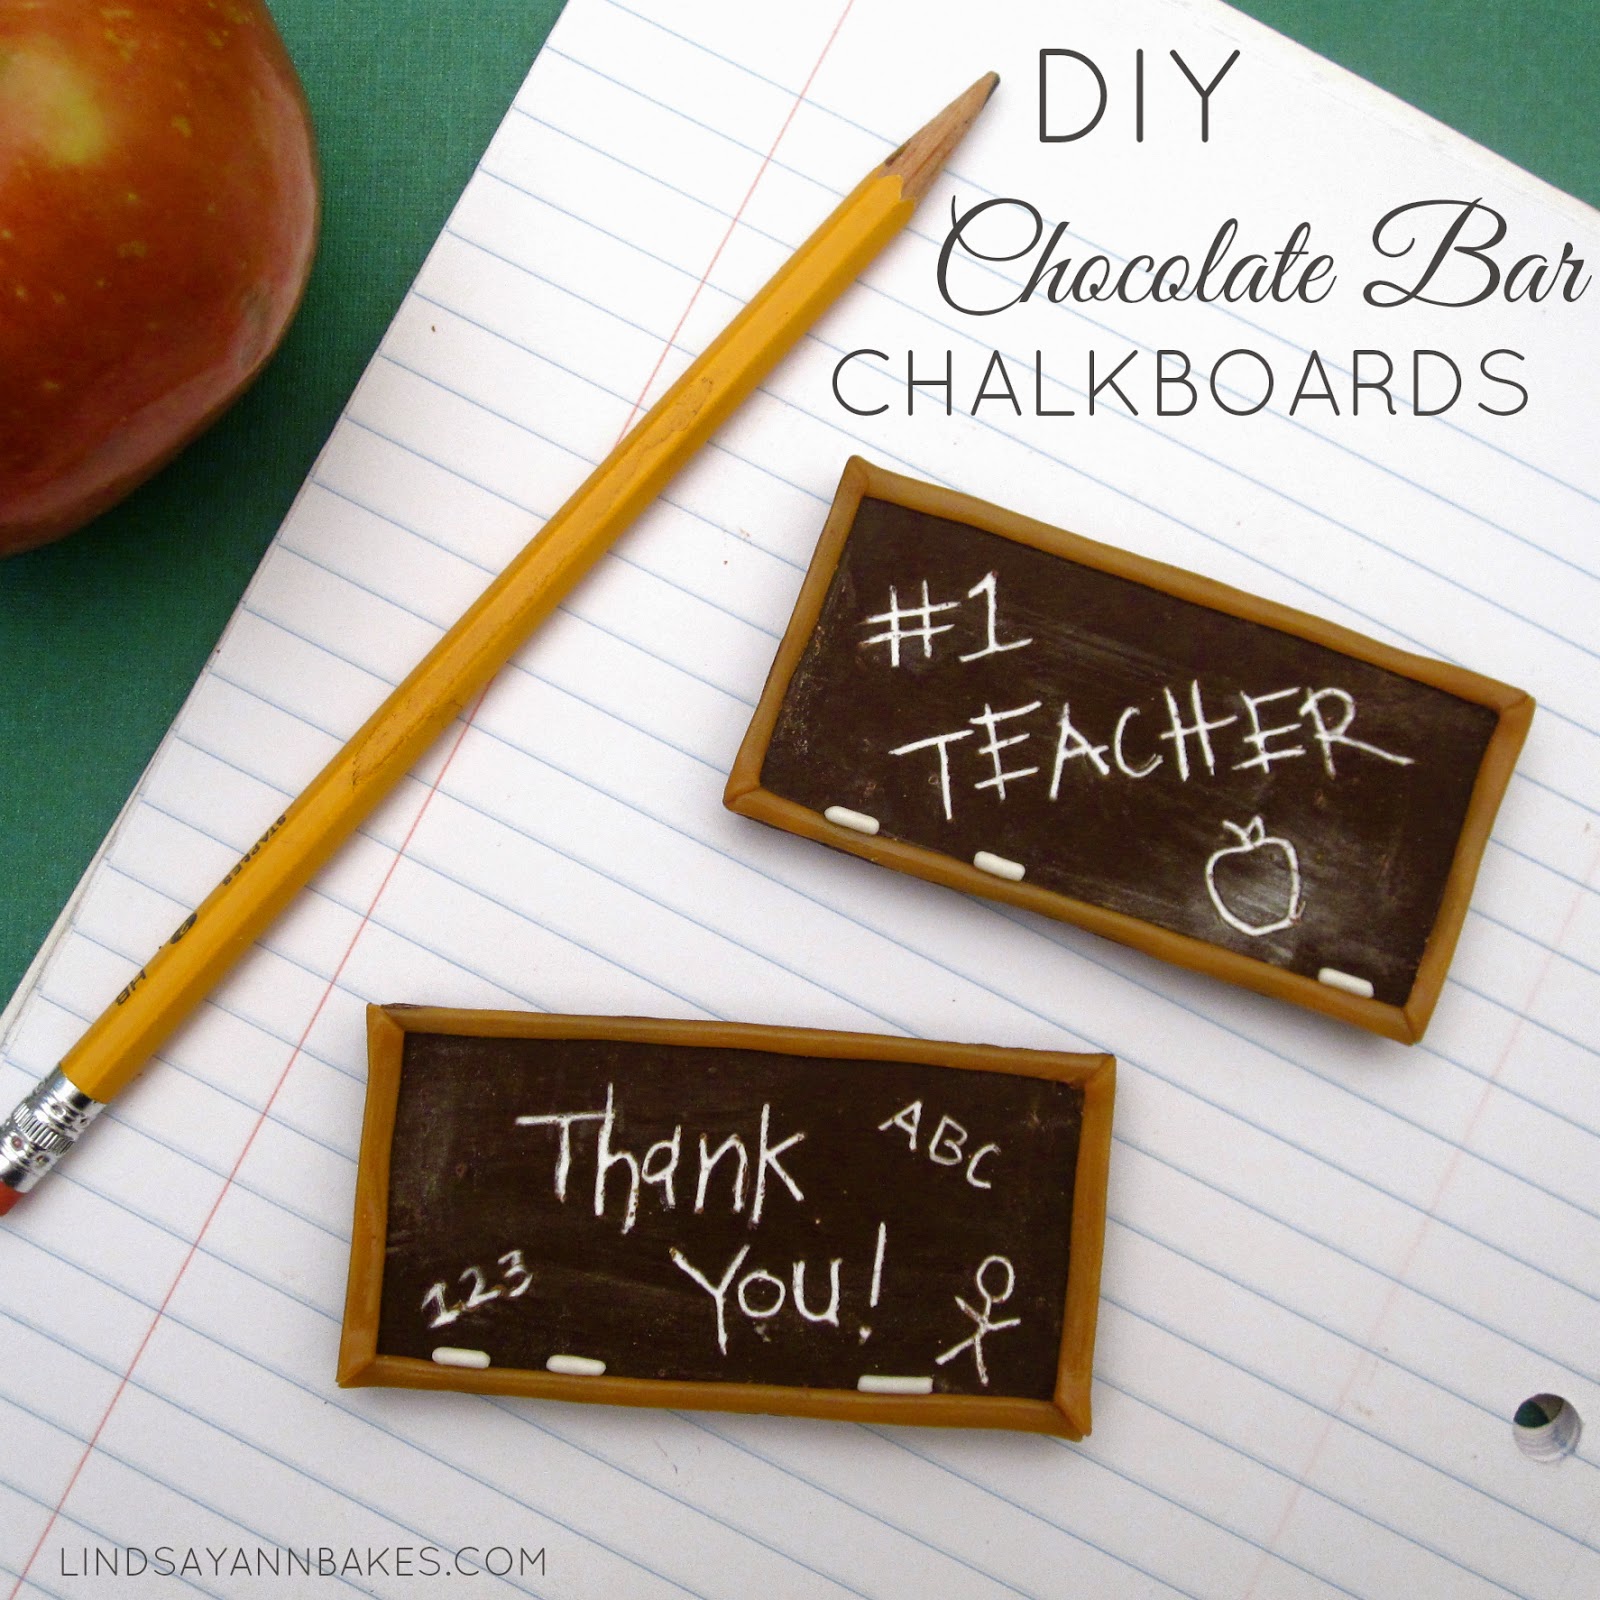 Making edible chalk is so easy, you'll want to make chalkboard